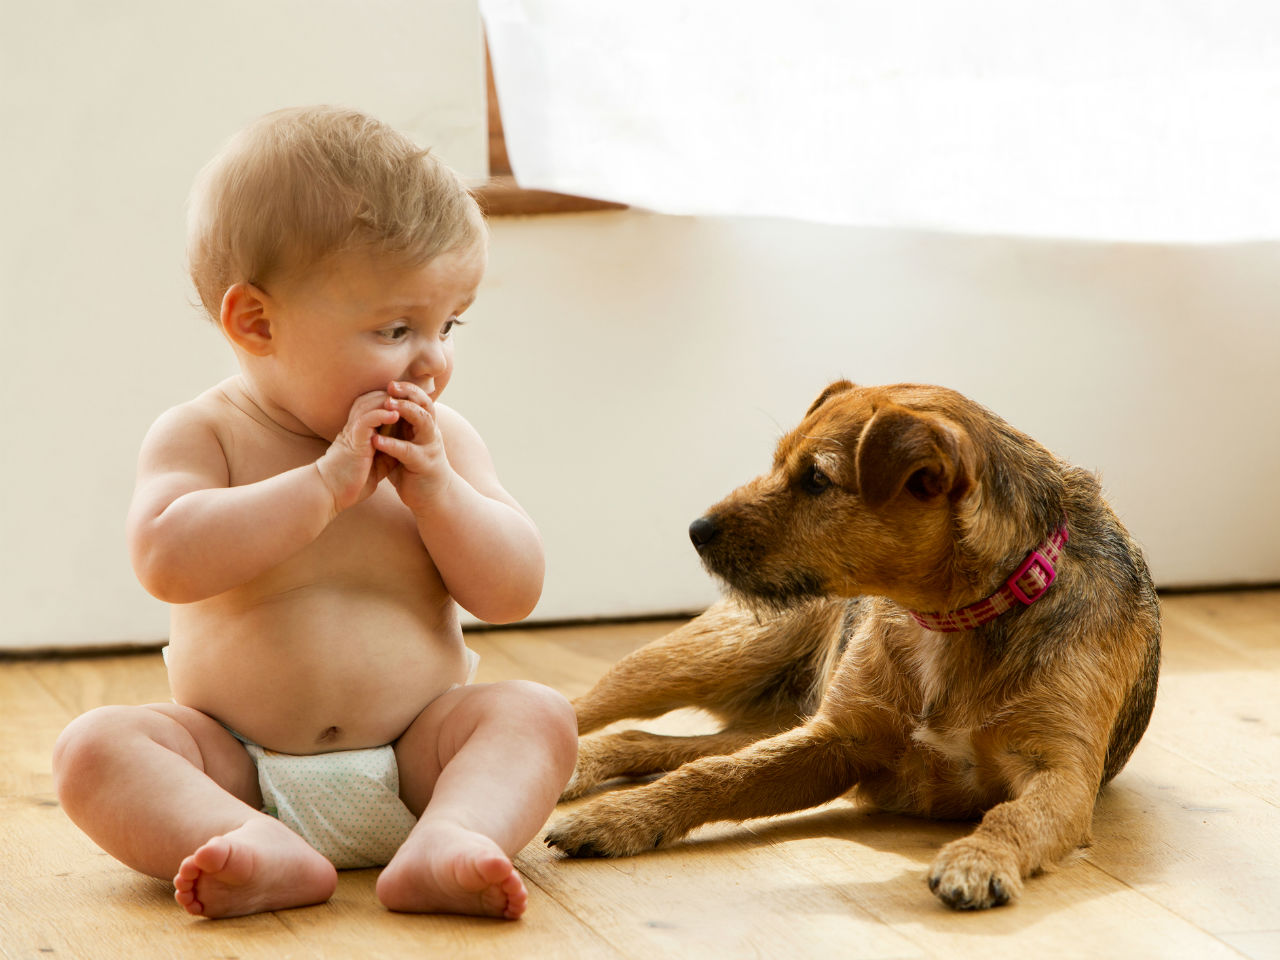 Why do dogs lick babies hands?